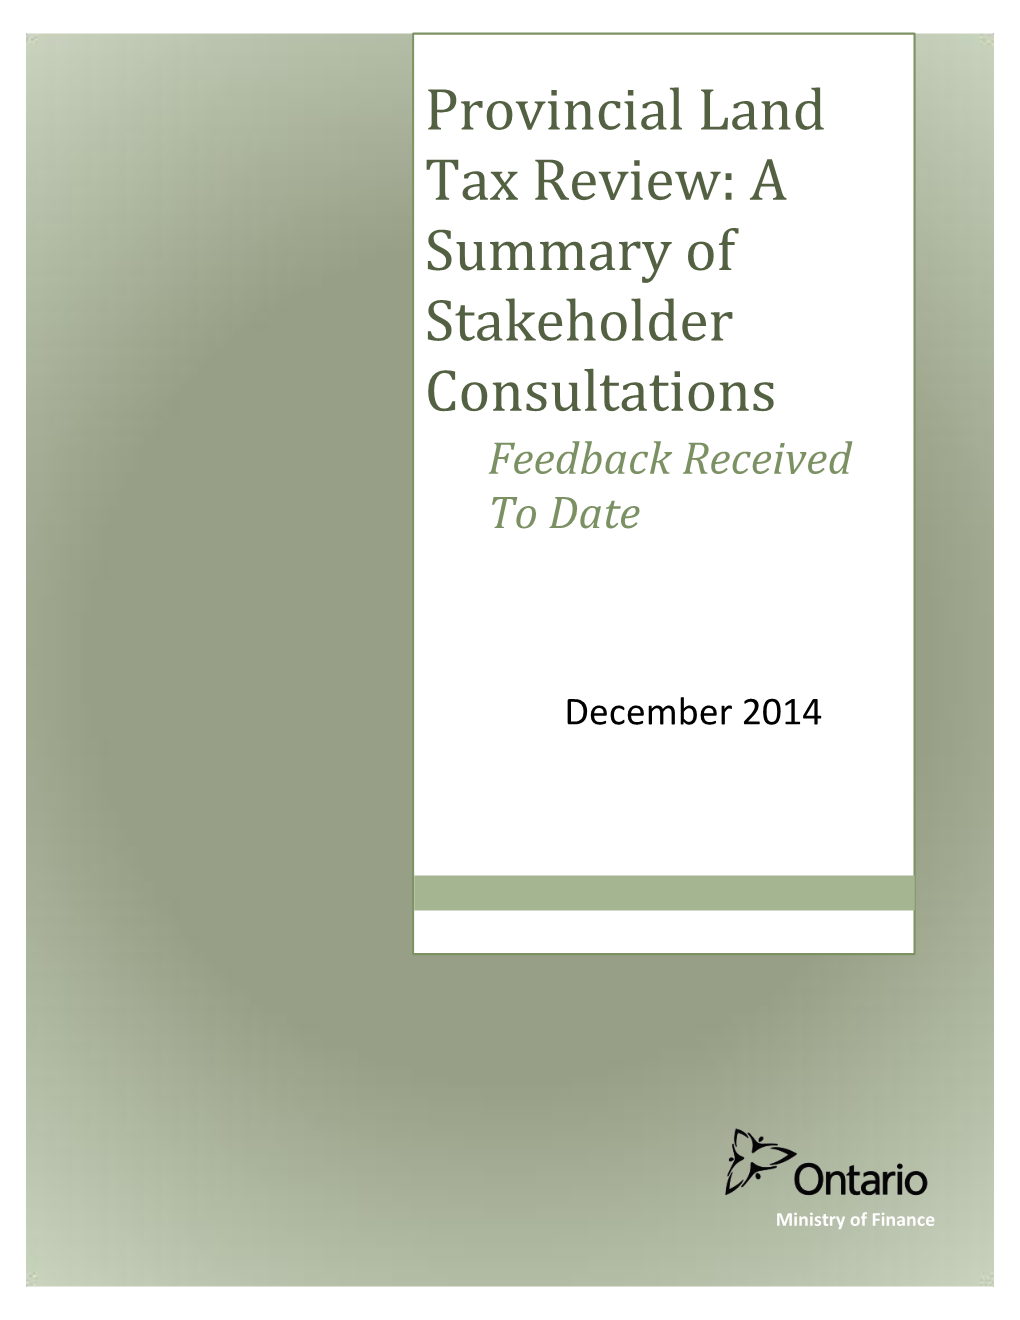 Provincial Land Tax Review Stakeholder